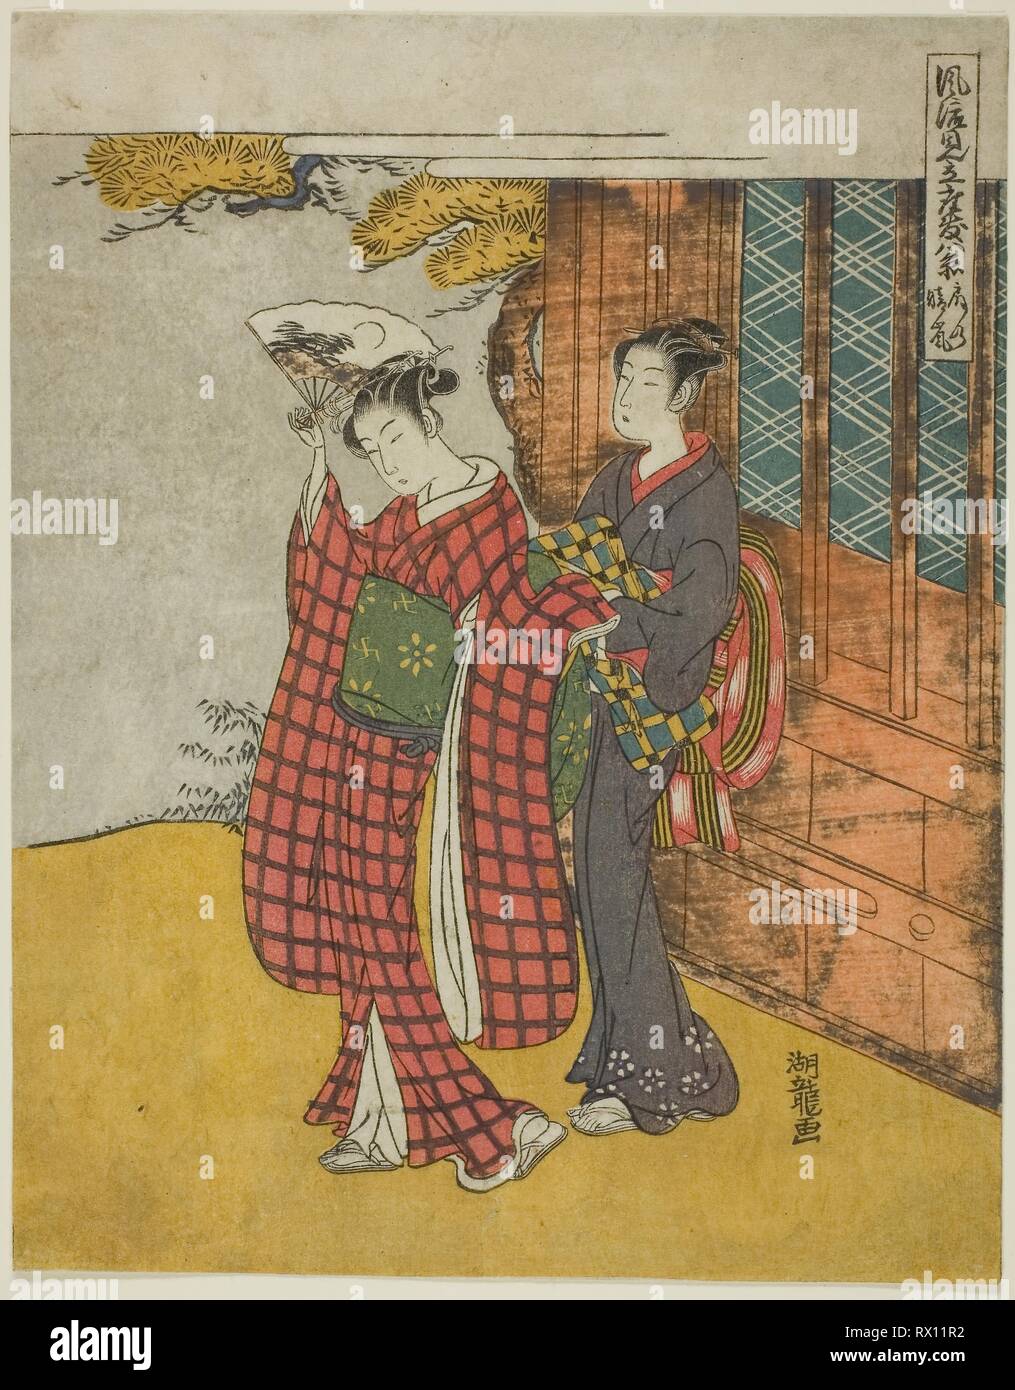 Clearing Weather of the Fan (Ogi no seiran), from the series 'Fashionable Parodies of the Eight Parlor Views (Furyu mitate zashiki hakkei)'. Isoda Koryusai; Japanese, 1735-1790. Date: 1768-1780. Dimensions: . Color woodblock print; chuban. Origin: Japan. Museum: The Chicago Art Institute. Stock Photo